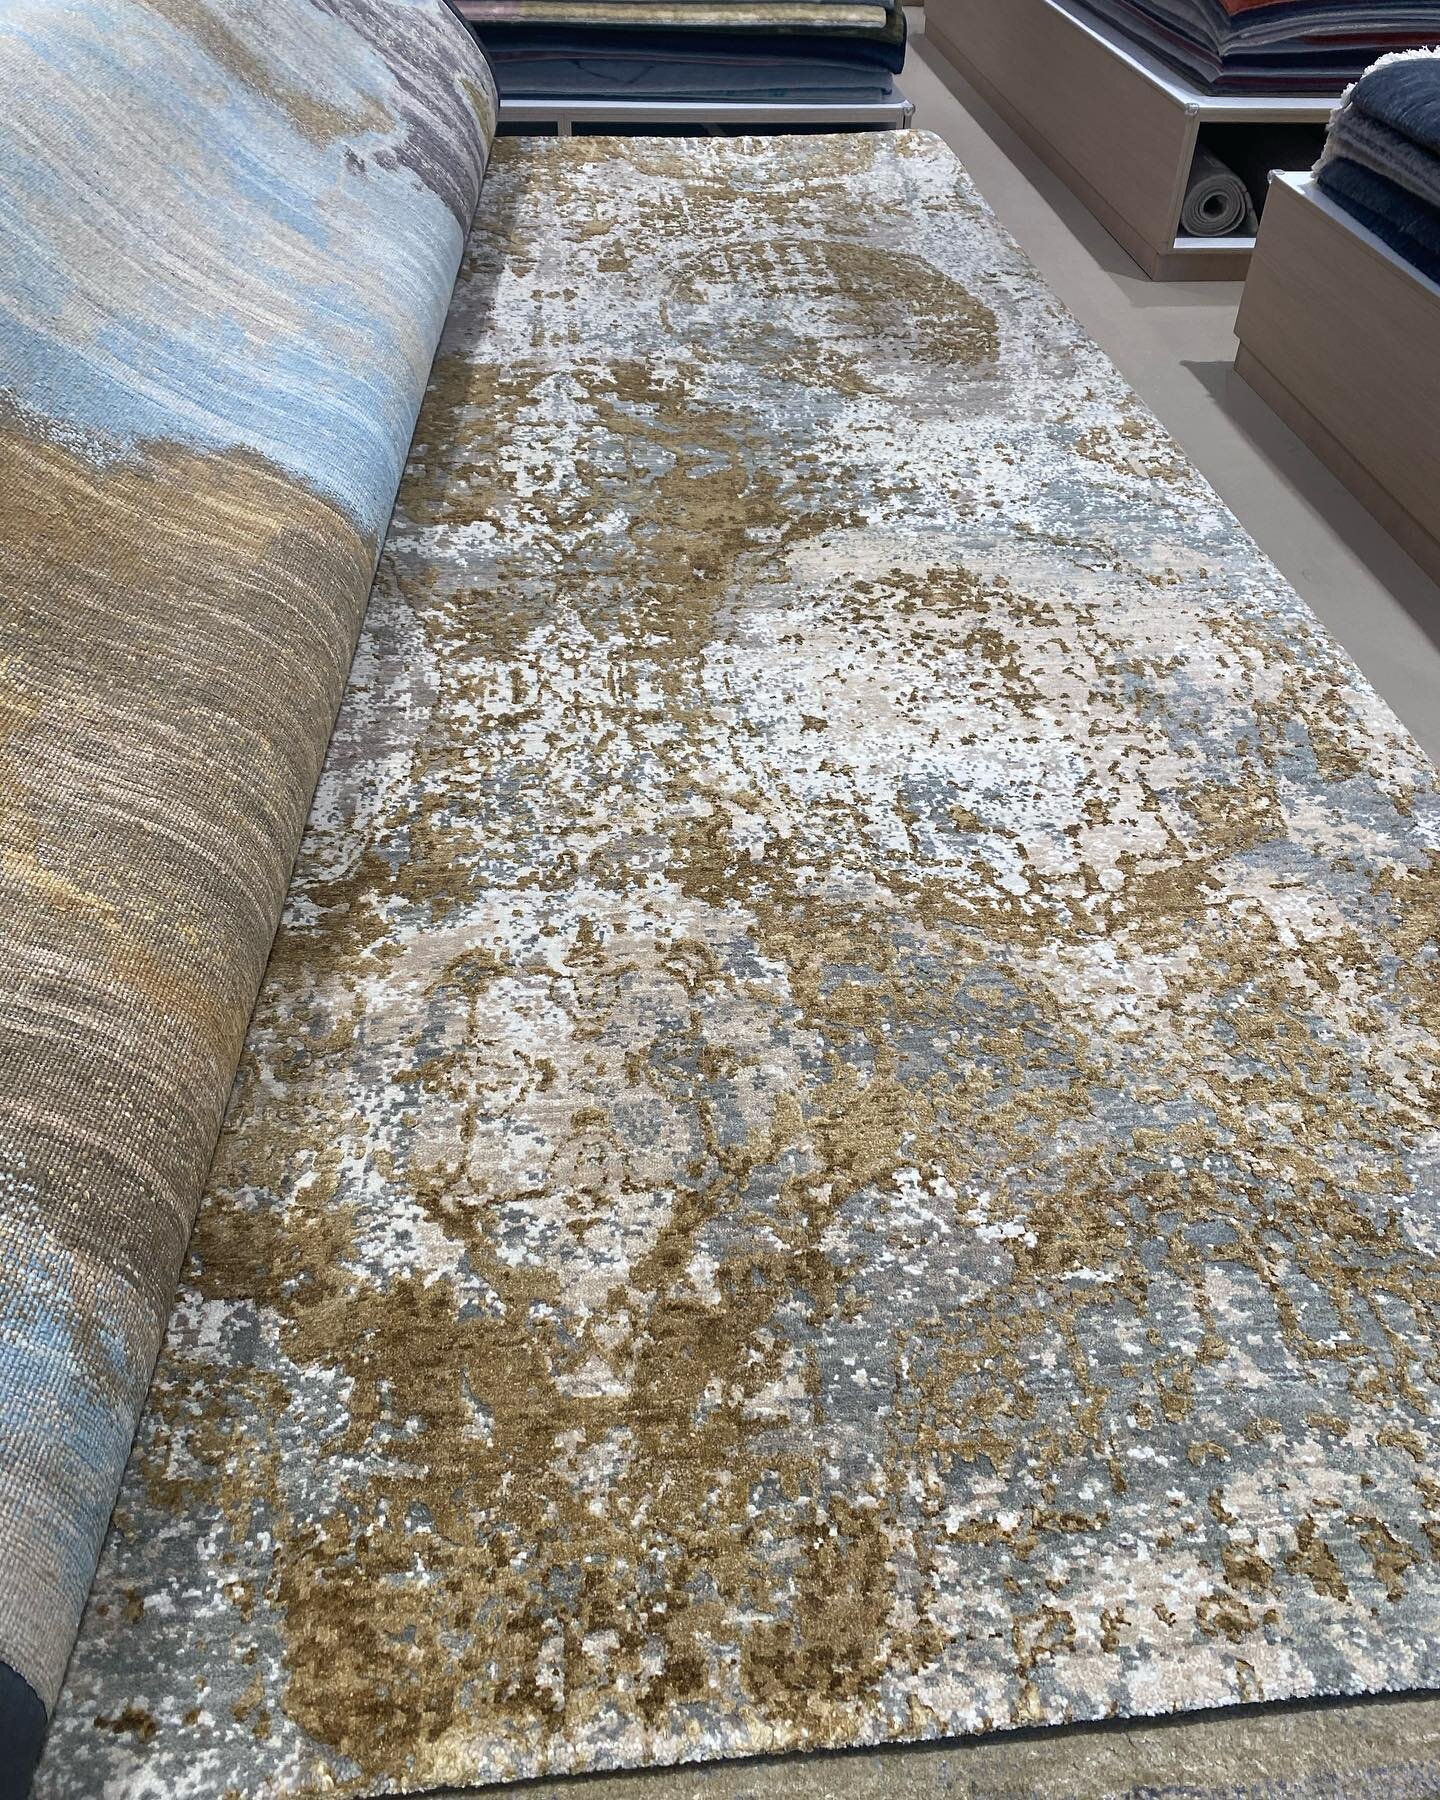 Looking forward to this beauty being installed. Hopefully not to long away now. @therugestablishment 

#rugdesign #customrugs #interiordesign #interiorstyling #beautyintheeveryday